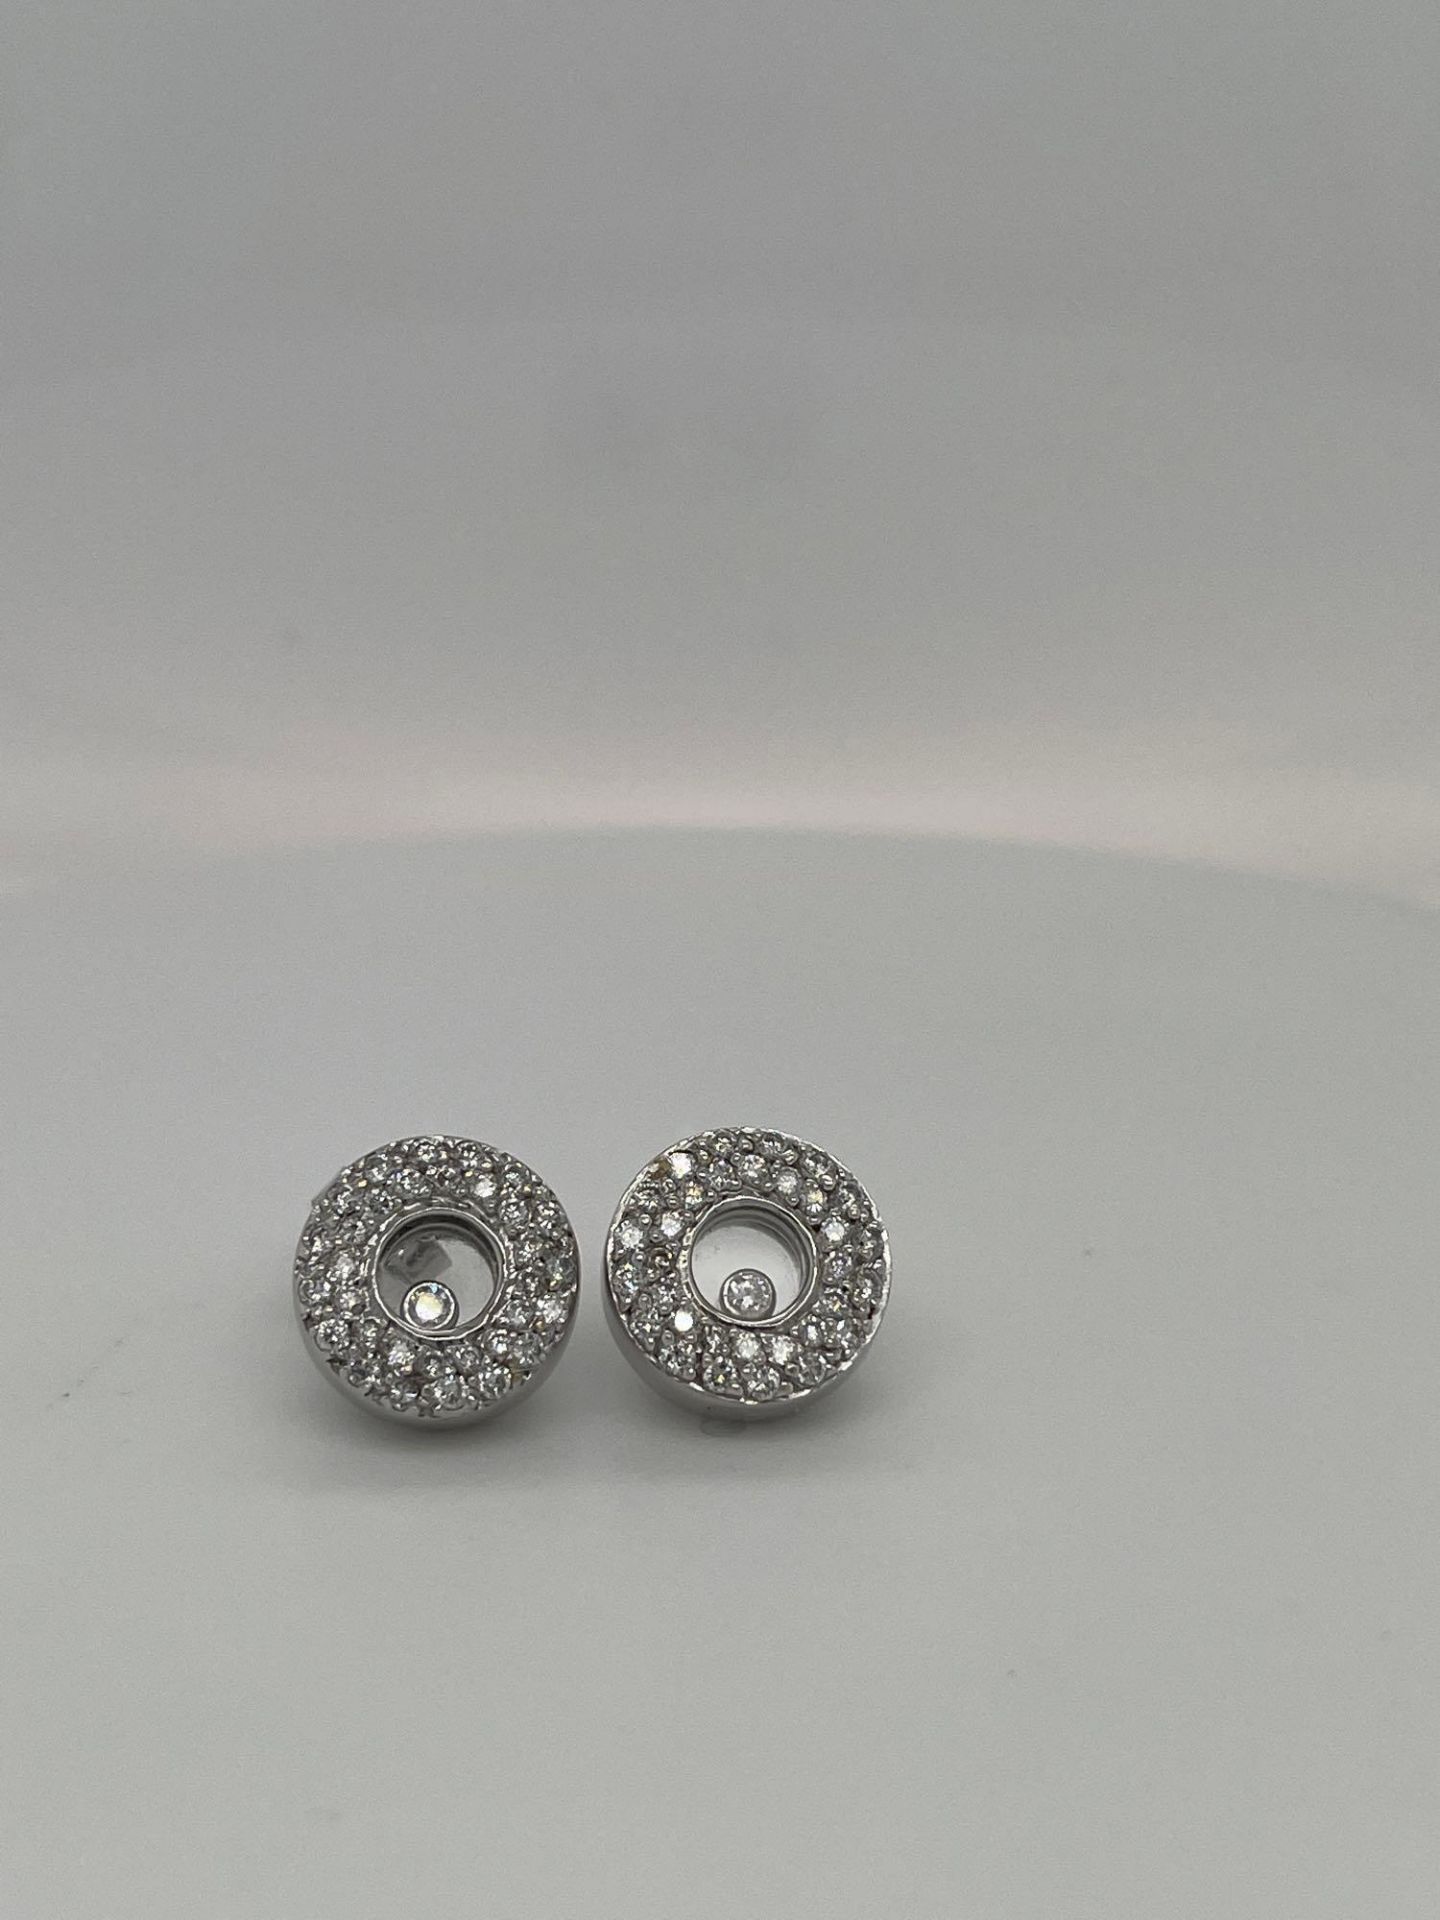 18KT WHITE GOLD CIRCLE DIAMOND EARRINGS .80CT PAVE DIAMONDS/ .80CT 18KT WHITE GOLD NECKLACE .80CT DI - Image 2 of 10